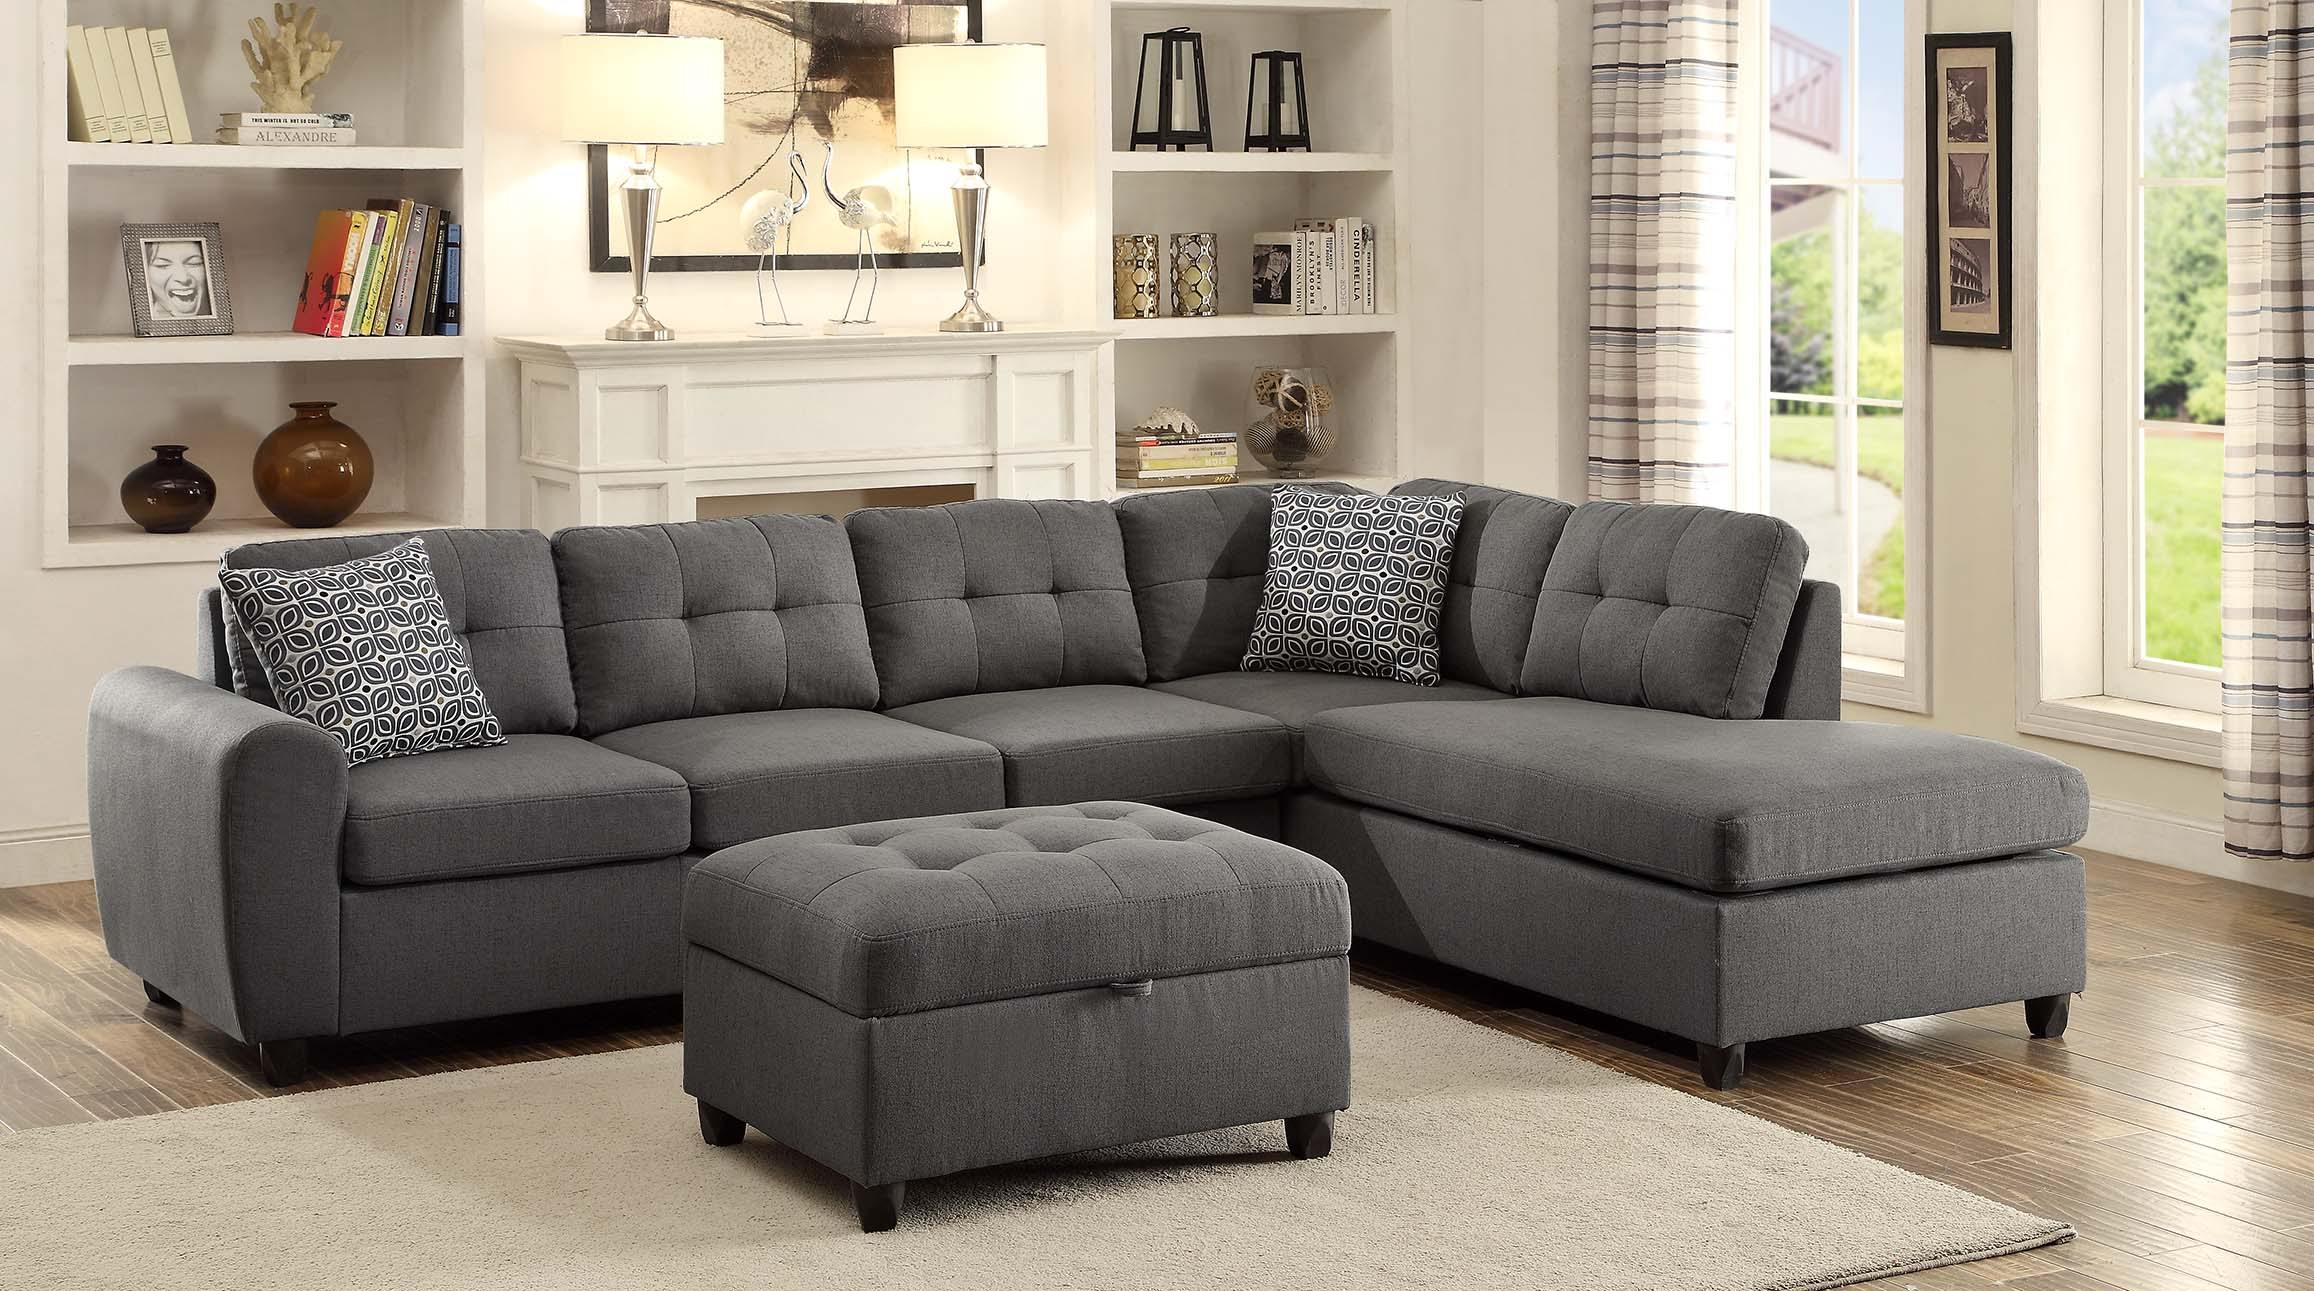 Stonenesse sectional 500414 Ottoman1 By coaster - sofafair.com